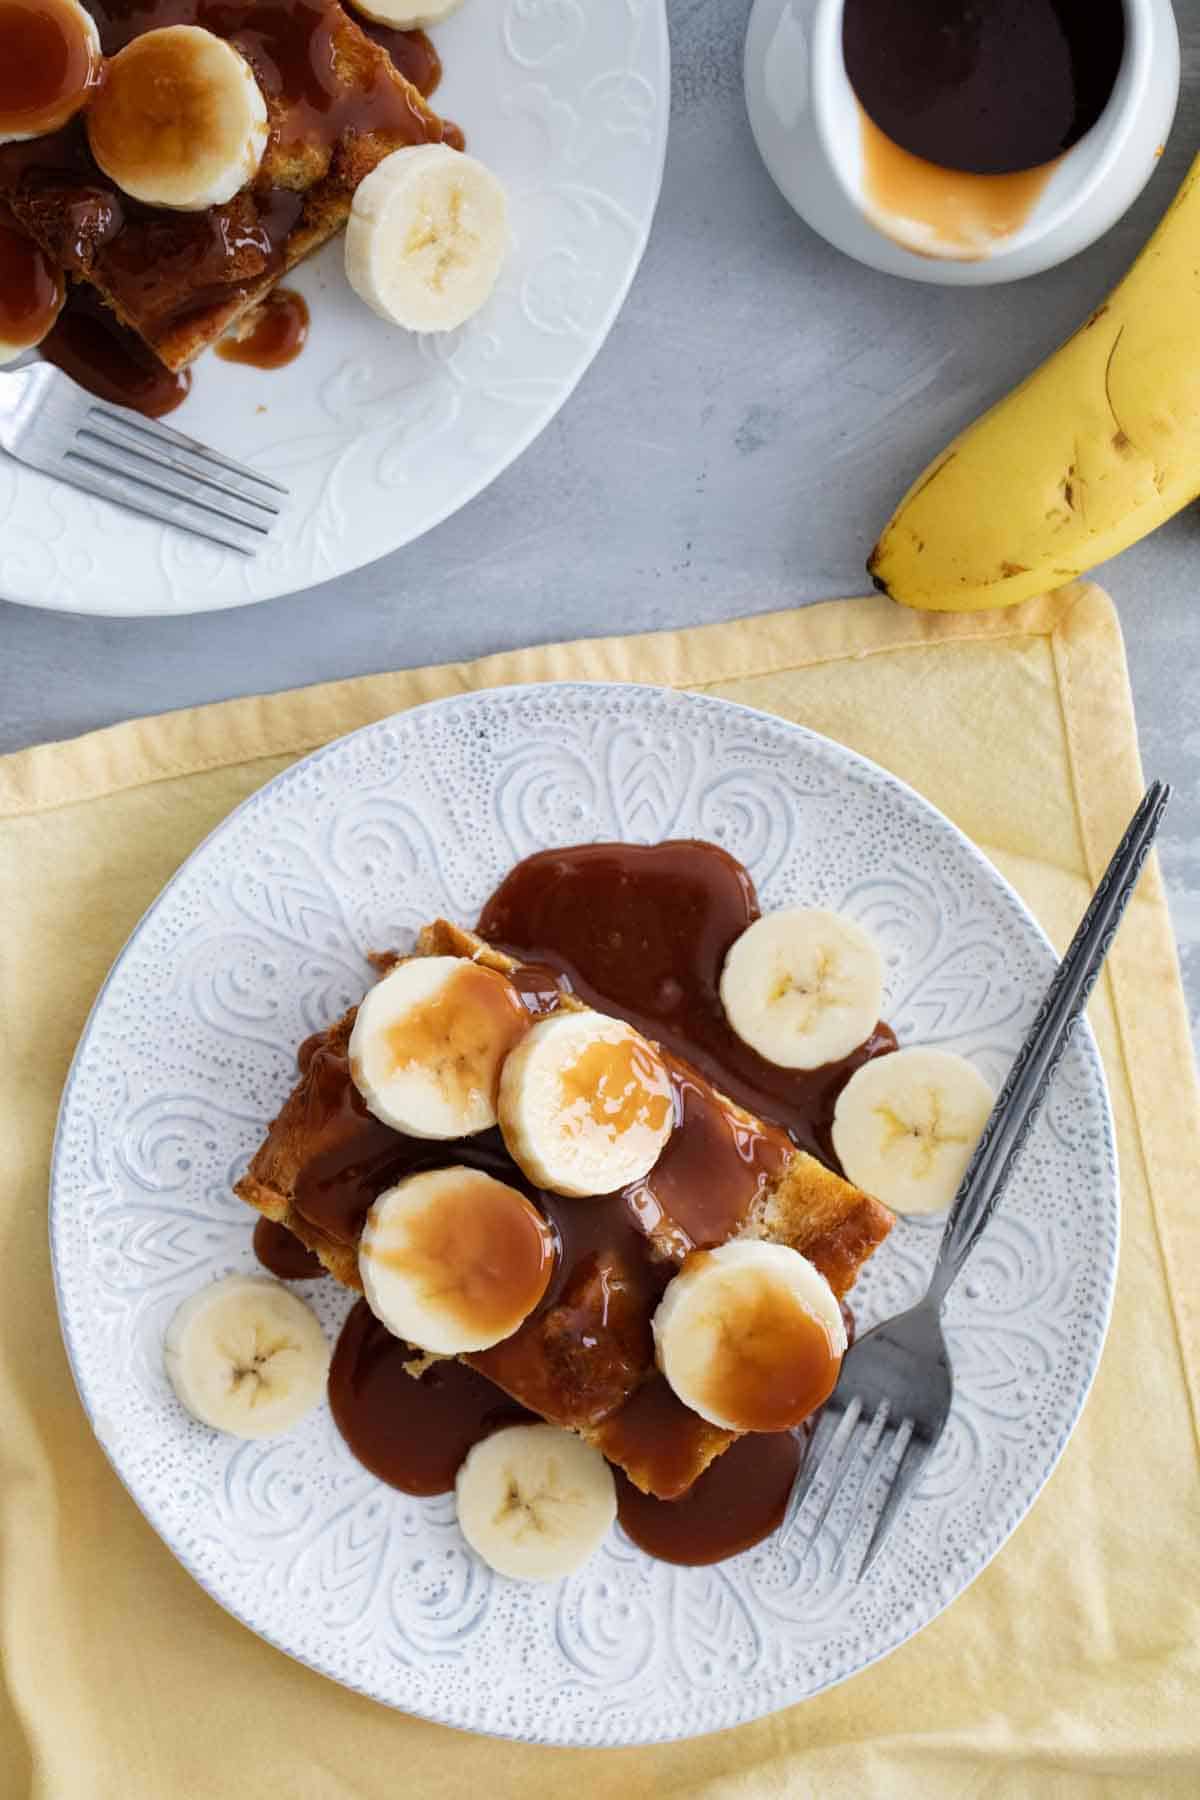 Brioche French Toast with Salted topped with salted Caramel and fresh Bananas.